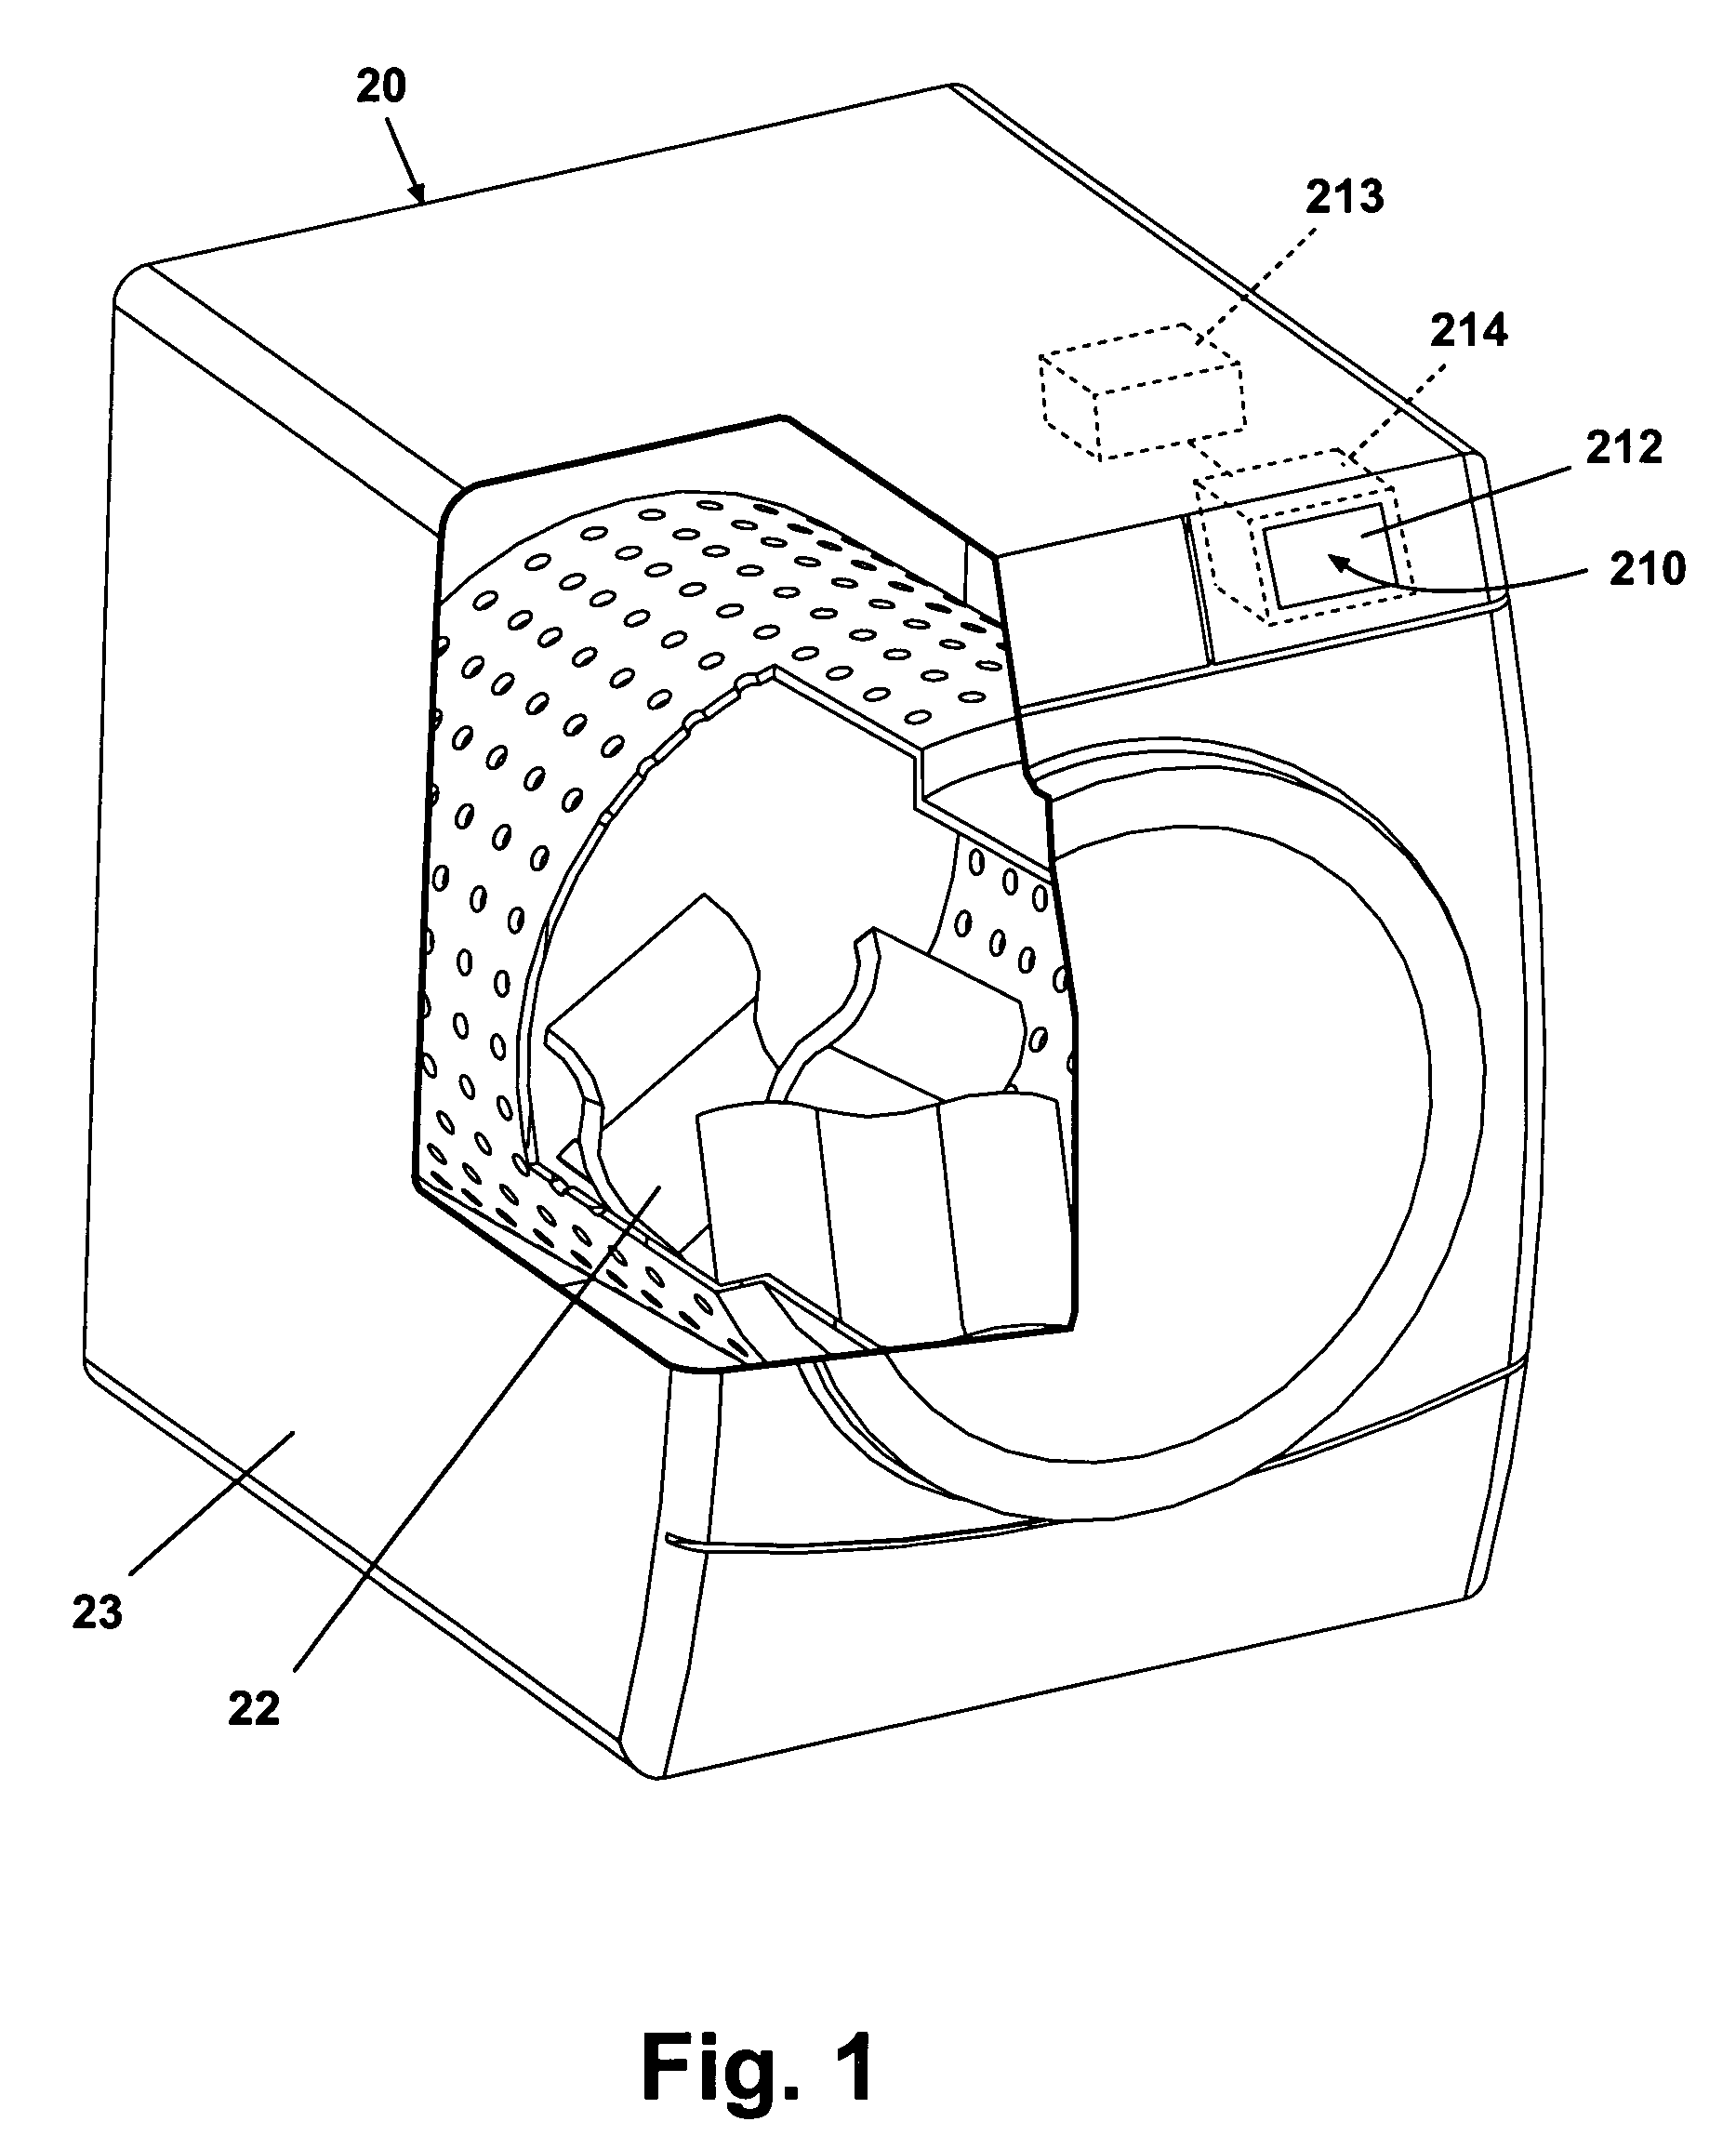 Automatic fabric treatment appliance with a manual fabric treatment station